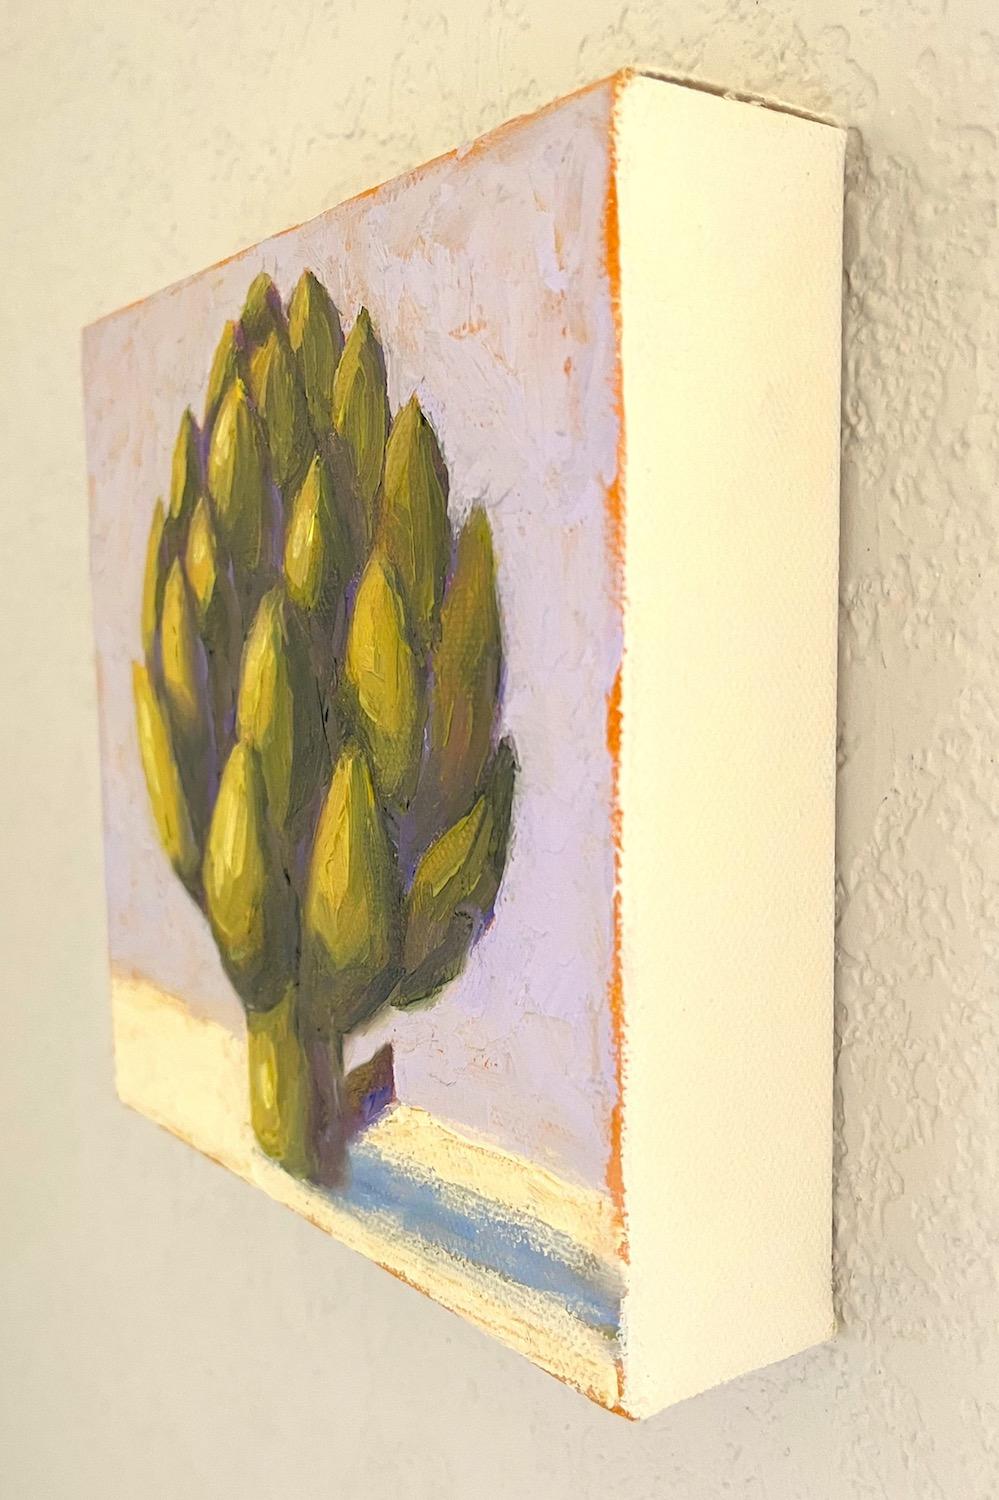 <p>Artist Comments<br>A luscious artichoke displays its scaly exterior. Its texture and rich colors complement the soft lavender background. The careful balance between color, light, and shadow further enhances the visual appeal of the